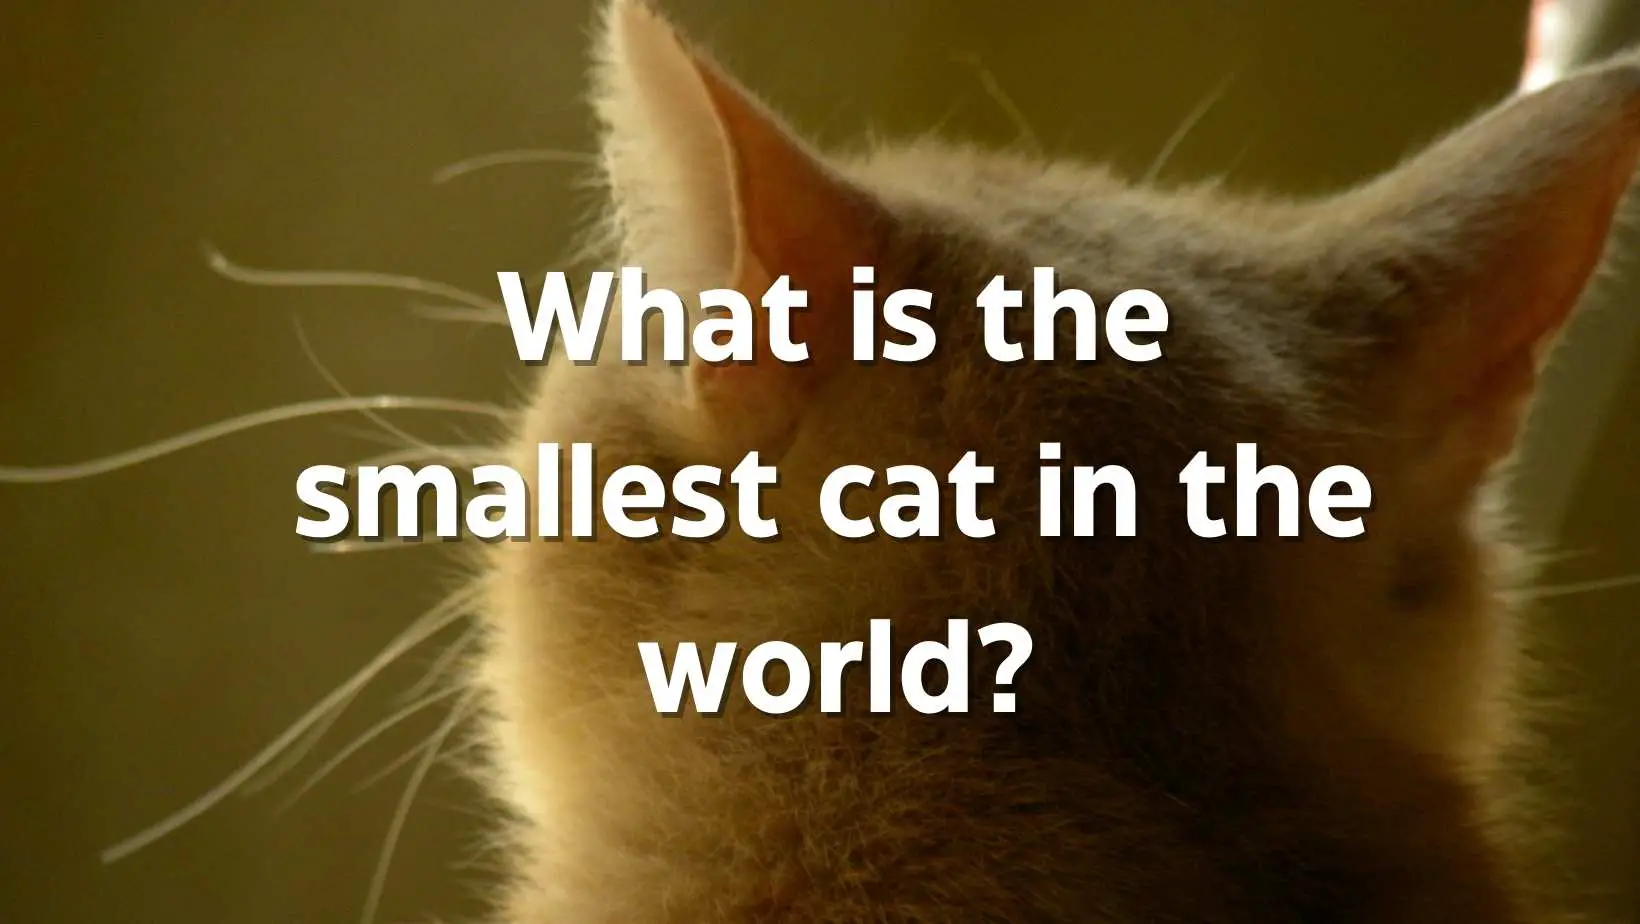 What is the smallest cat in the world?